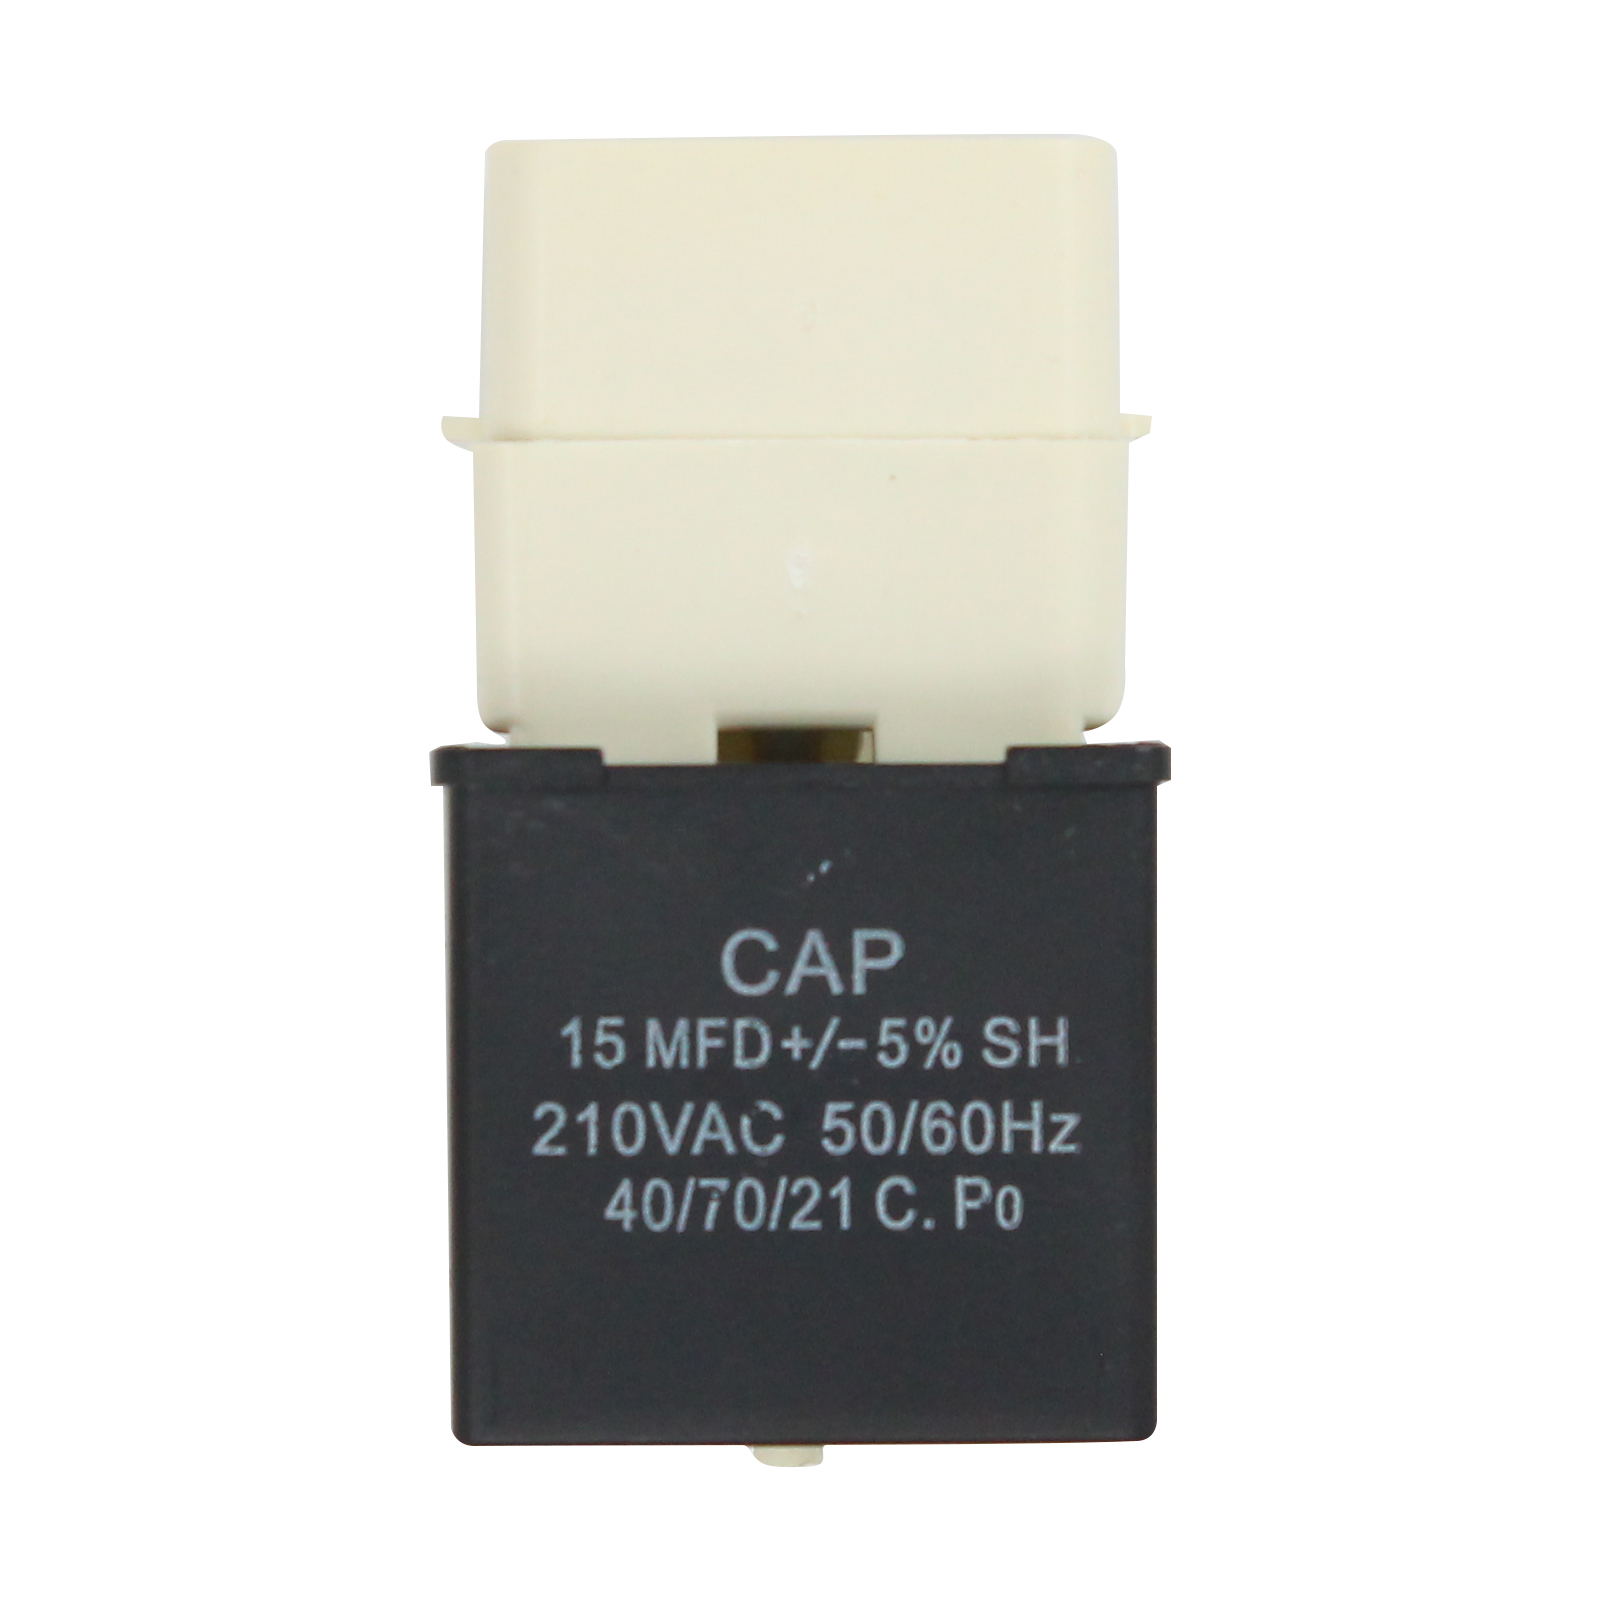 W10613606 Refrigerator Compressor Start Relay & Capacitor Replacement for Amana SCD22TBL (P1303511W L) Refrigerator - Compatible with W10613606 Start Device Relay Overload With Capacitor - image 2 of 4